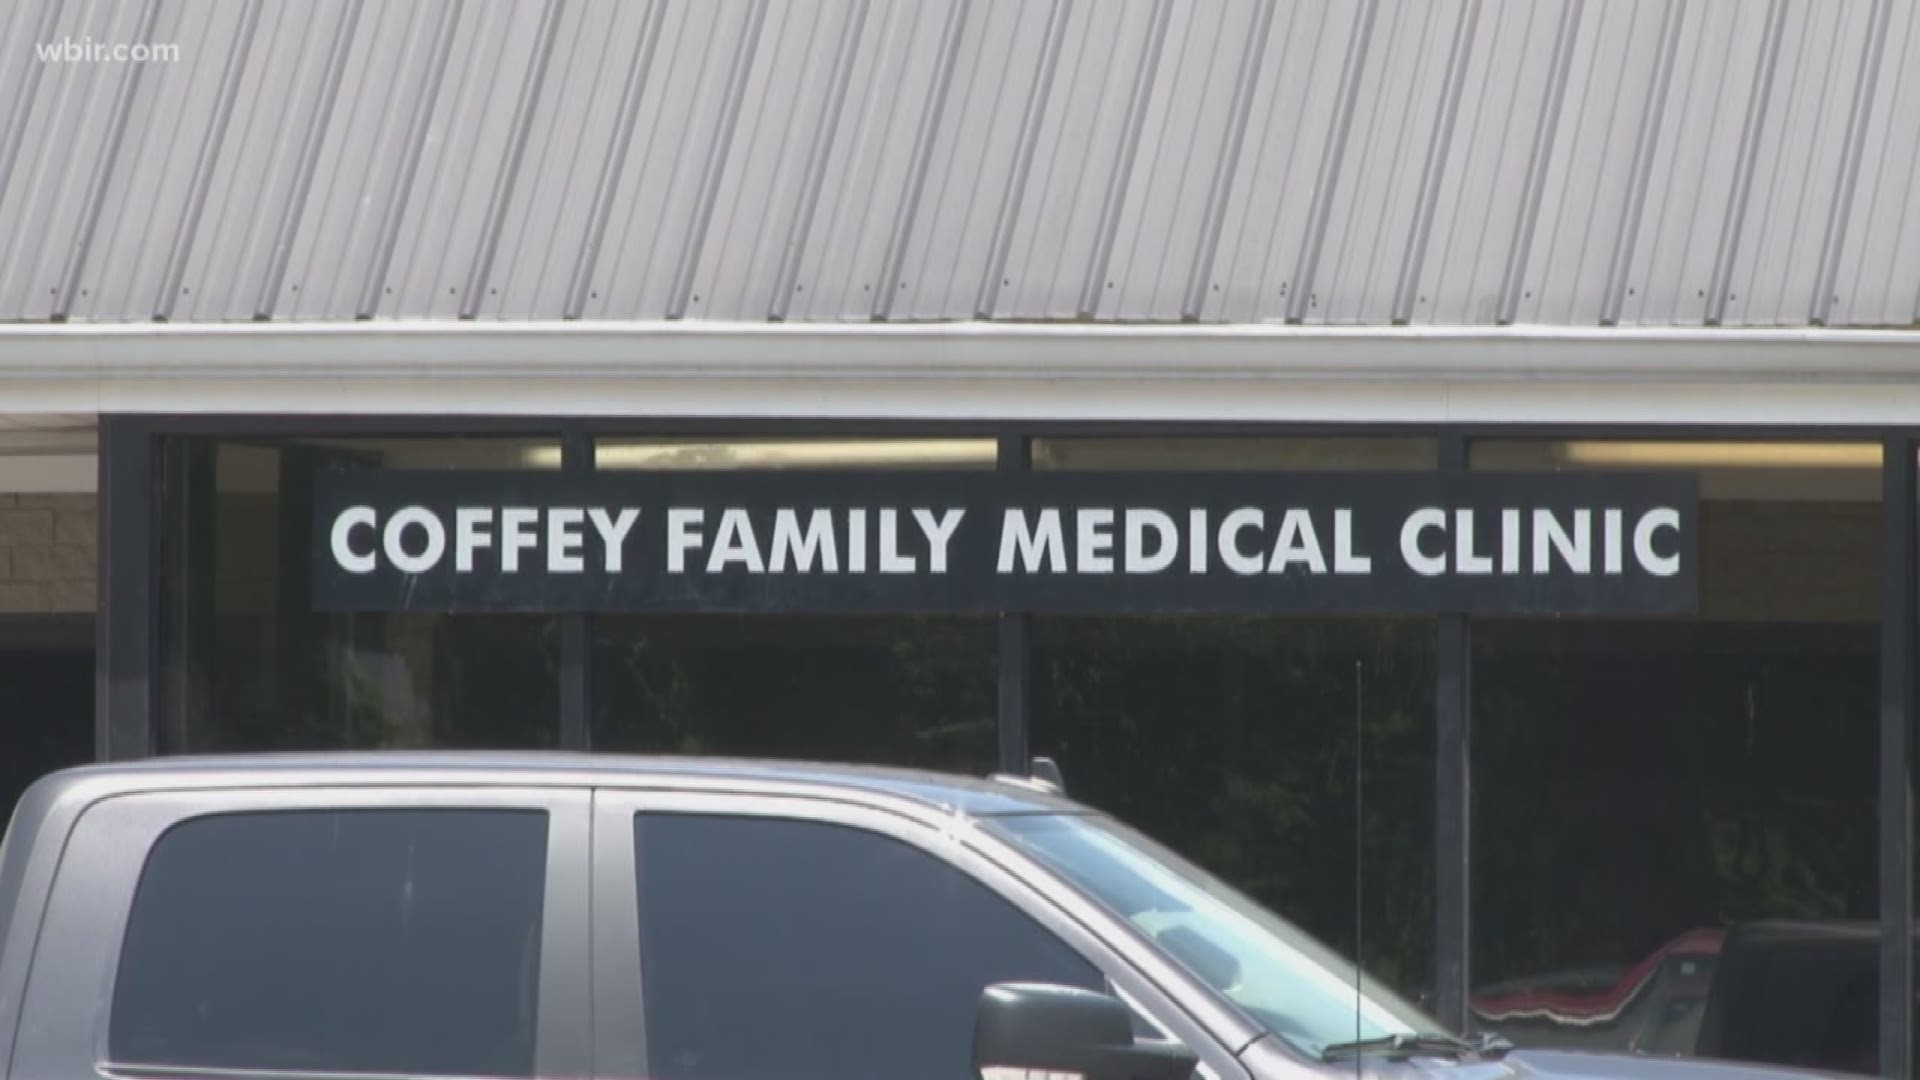 State and federal authorities raided two Oneida doctor's offices on Tuesday as part of an ongoing investigation after a couple of overdose deaths in Kentucky.